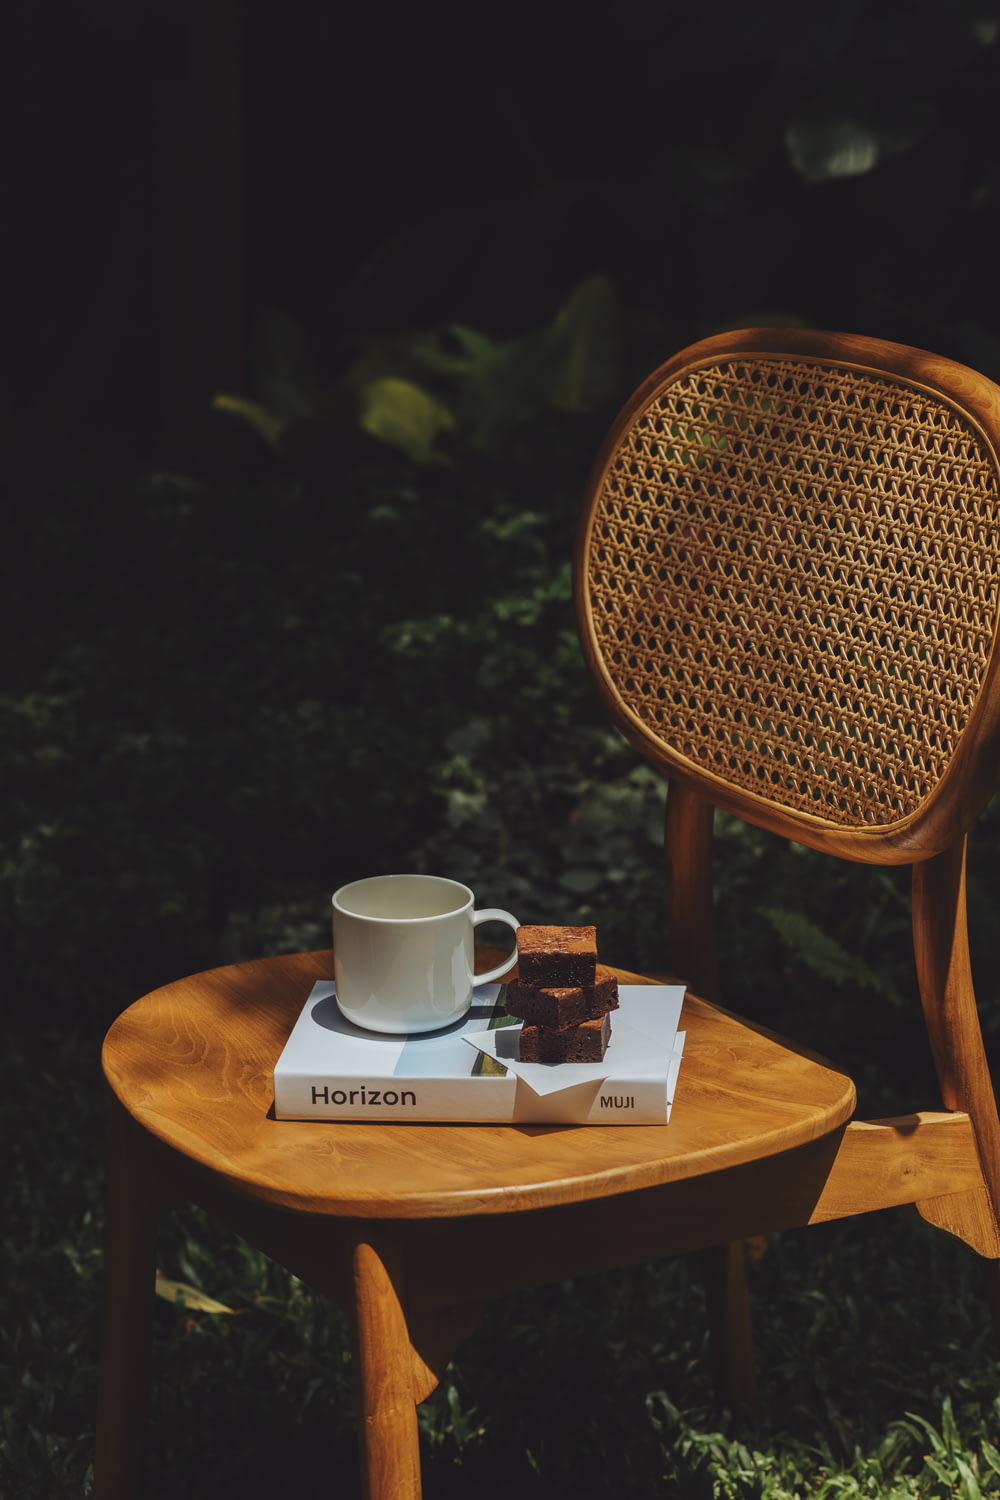 a wooden chair with a book and a cup on it